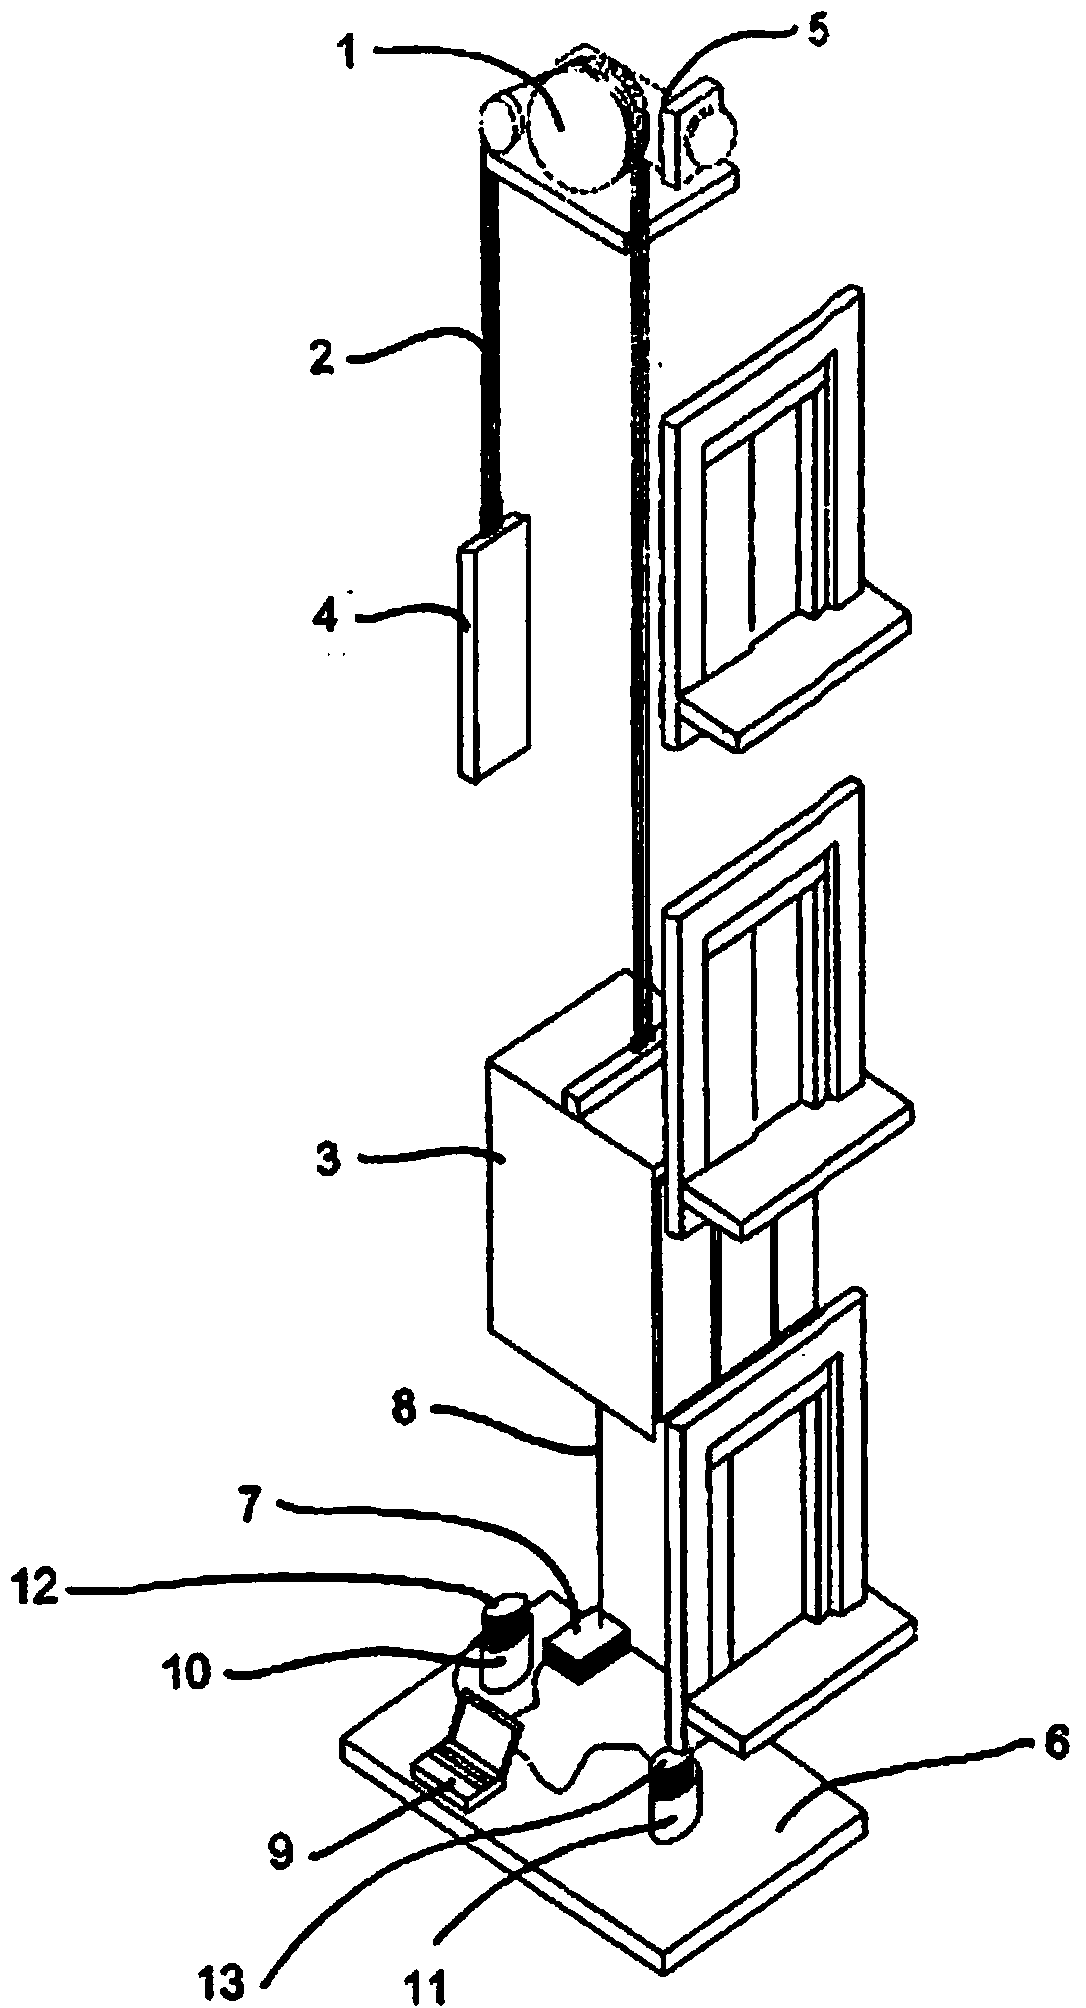 Method and arrangement for testing the proper functionality of an elevator